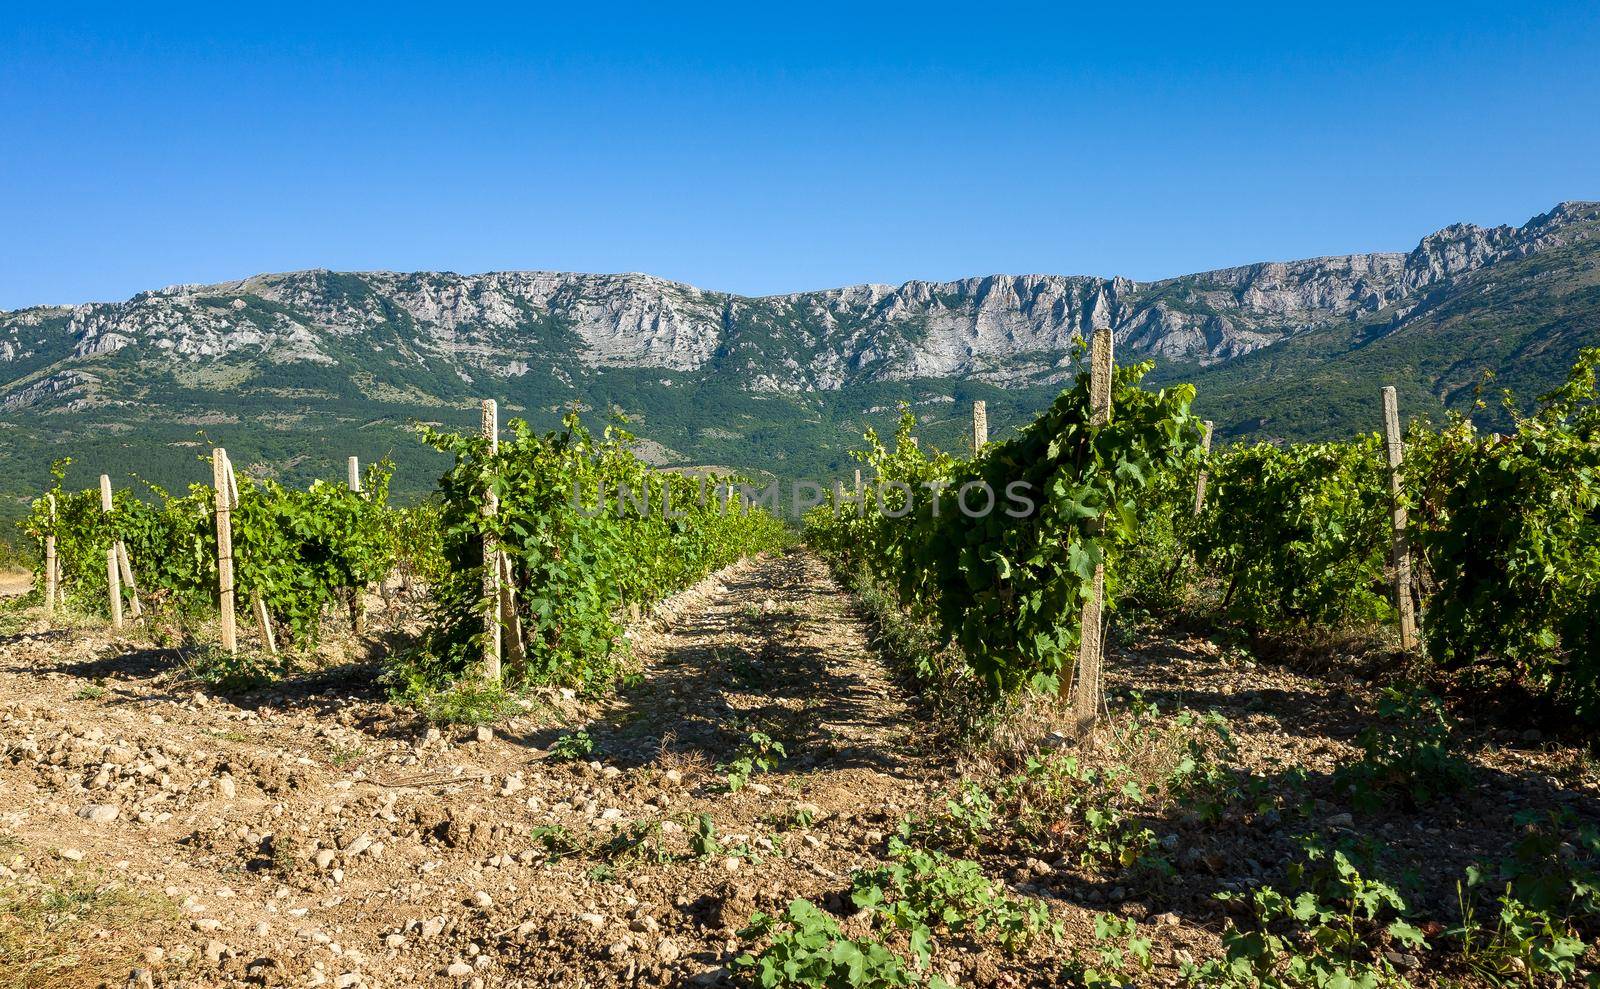 Rows of vineyards surrounded by rocky mountains in the early morning.